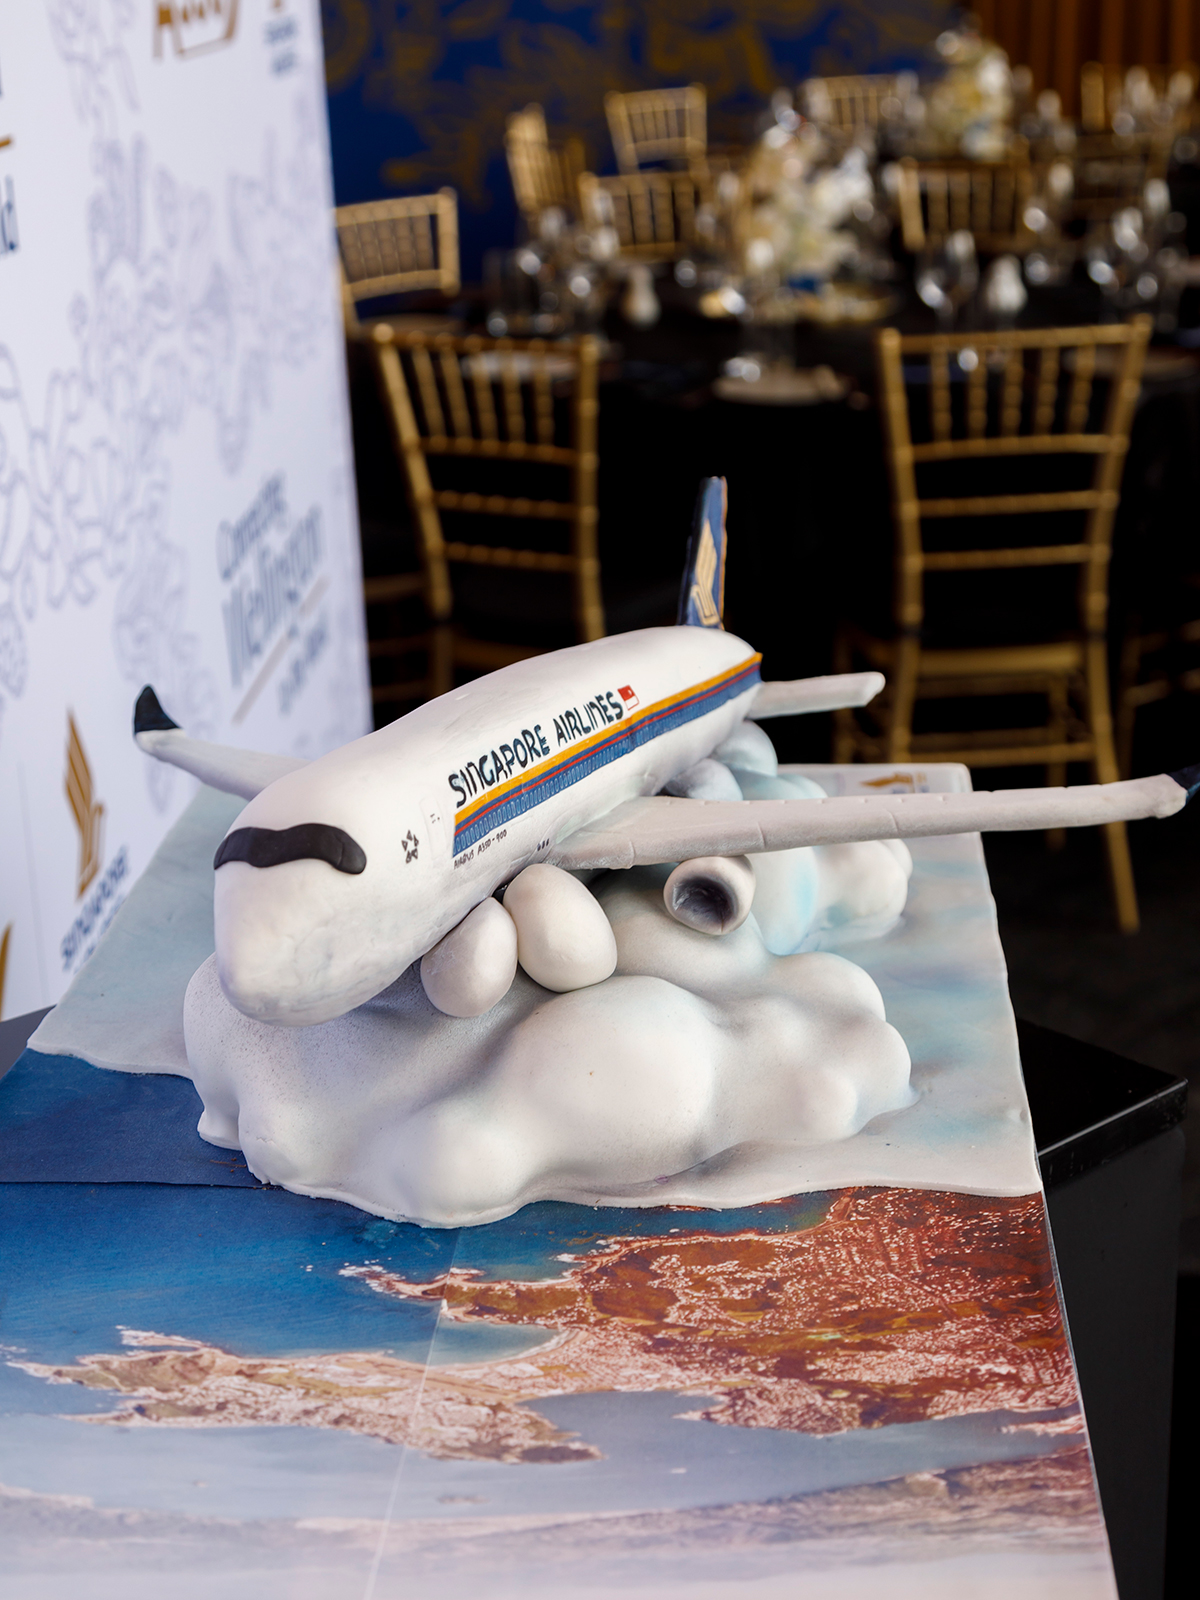 Product Launch ... Inaugural Singapore Airlines flight from Wellington to Melbourne